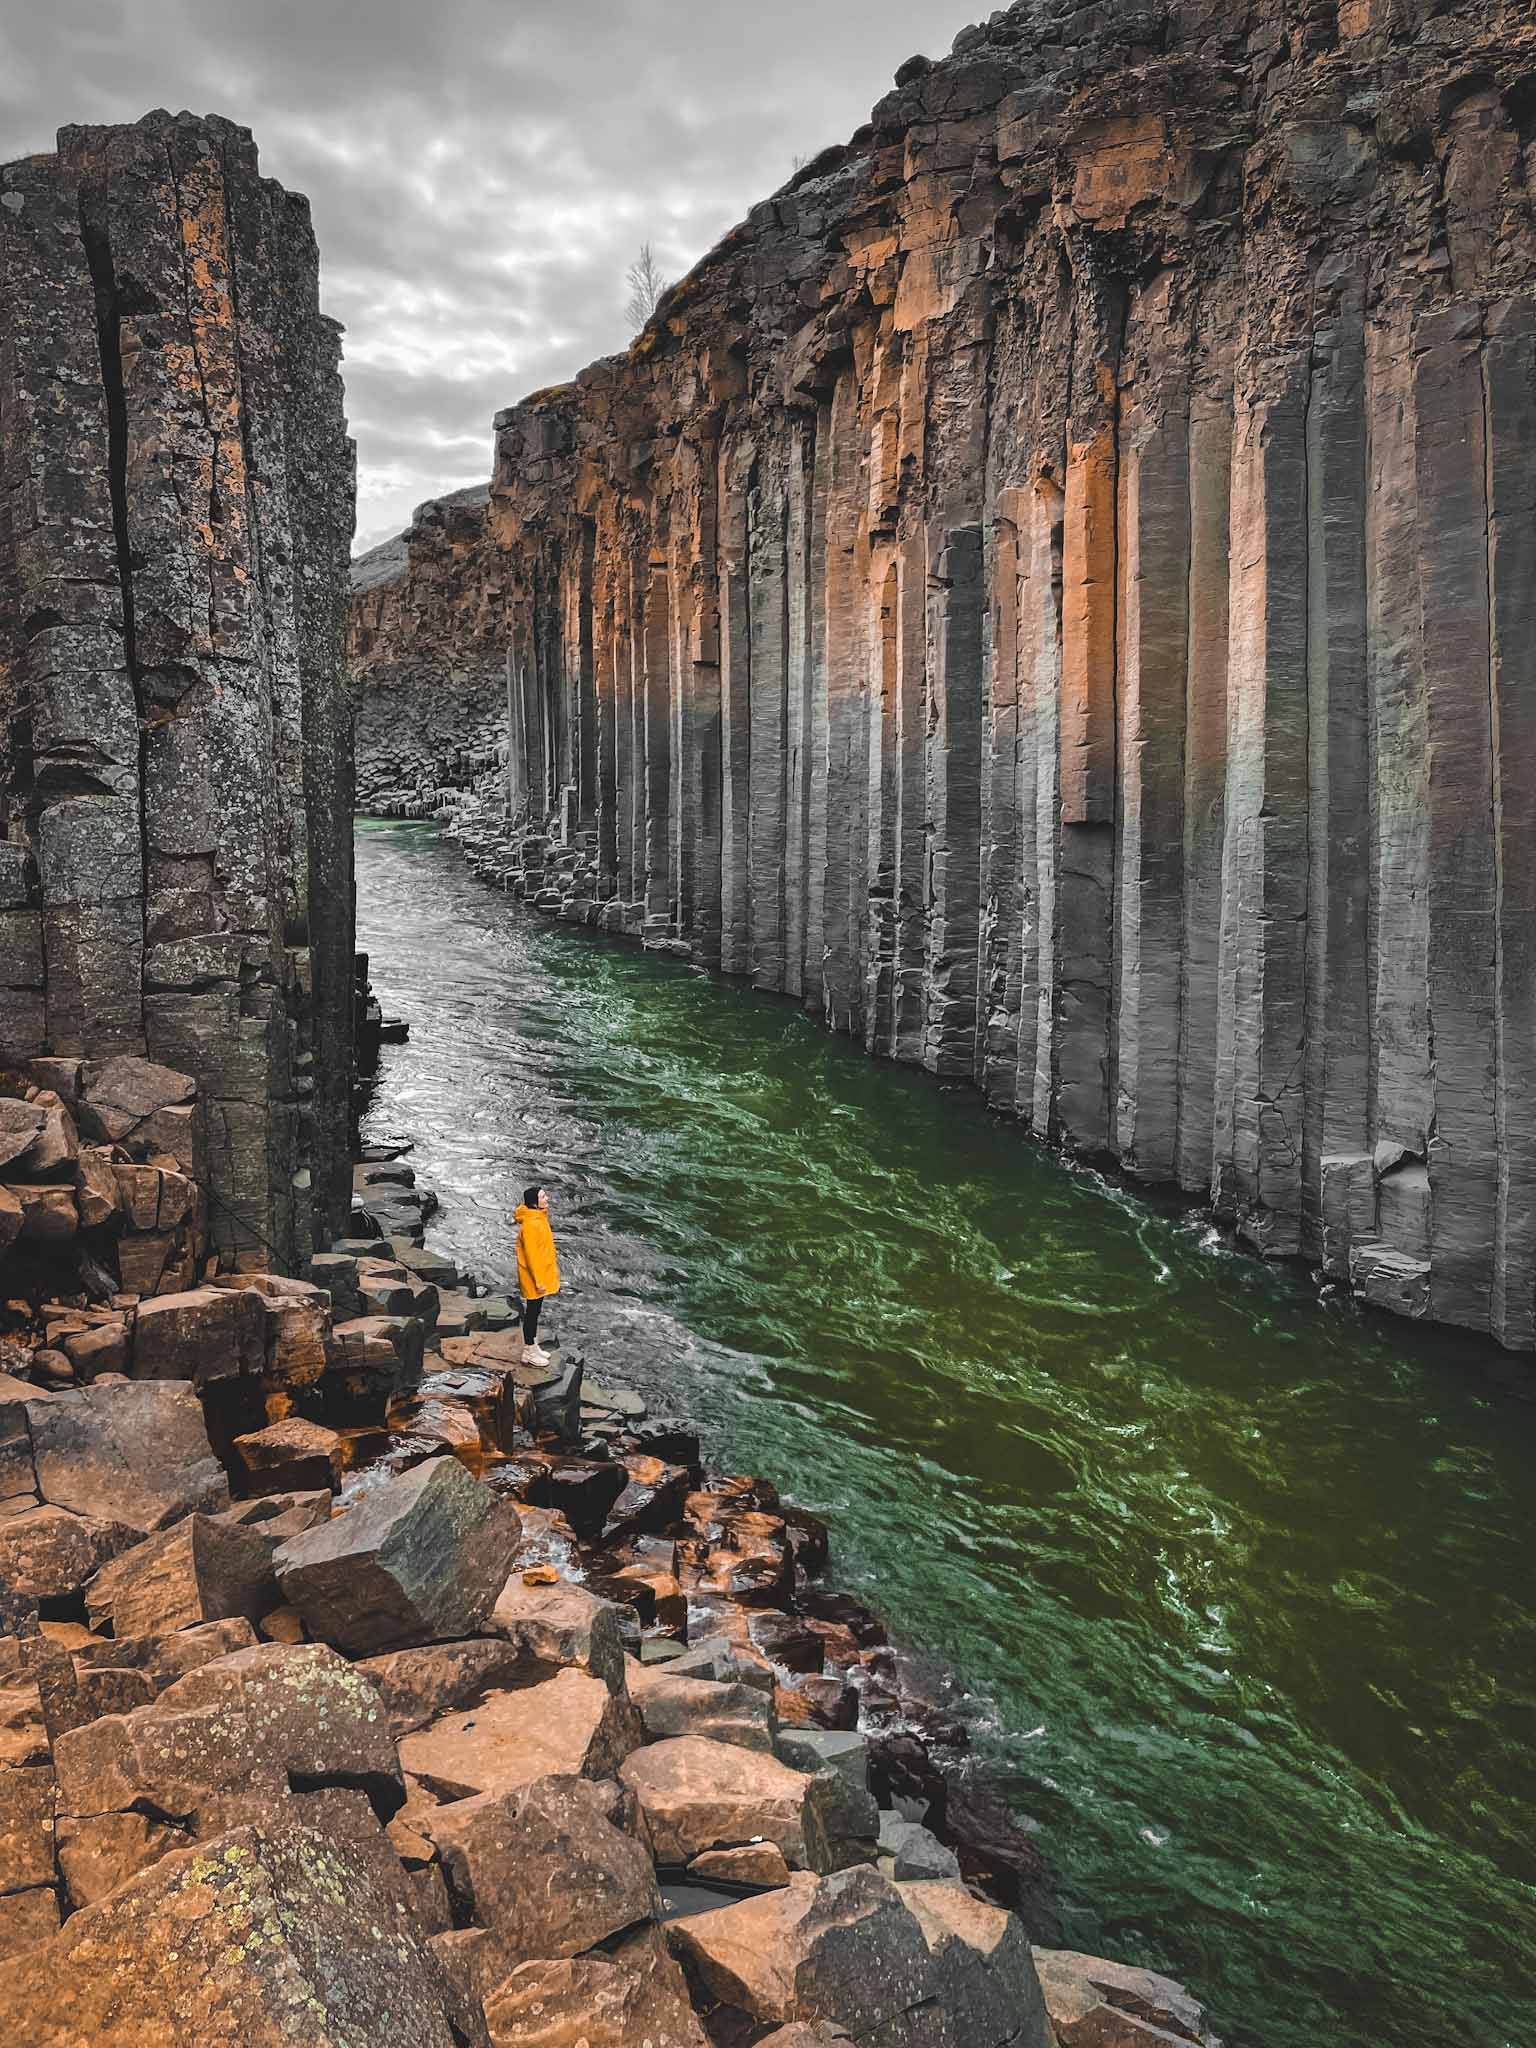 Iceland Instagram spots - Studlagil canyon in iceland with the basalt columns